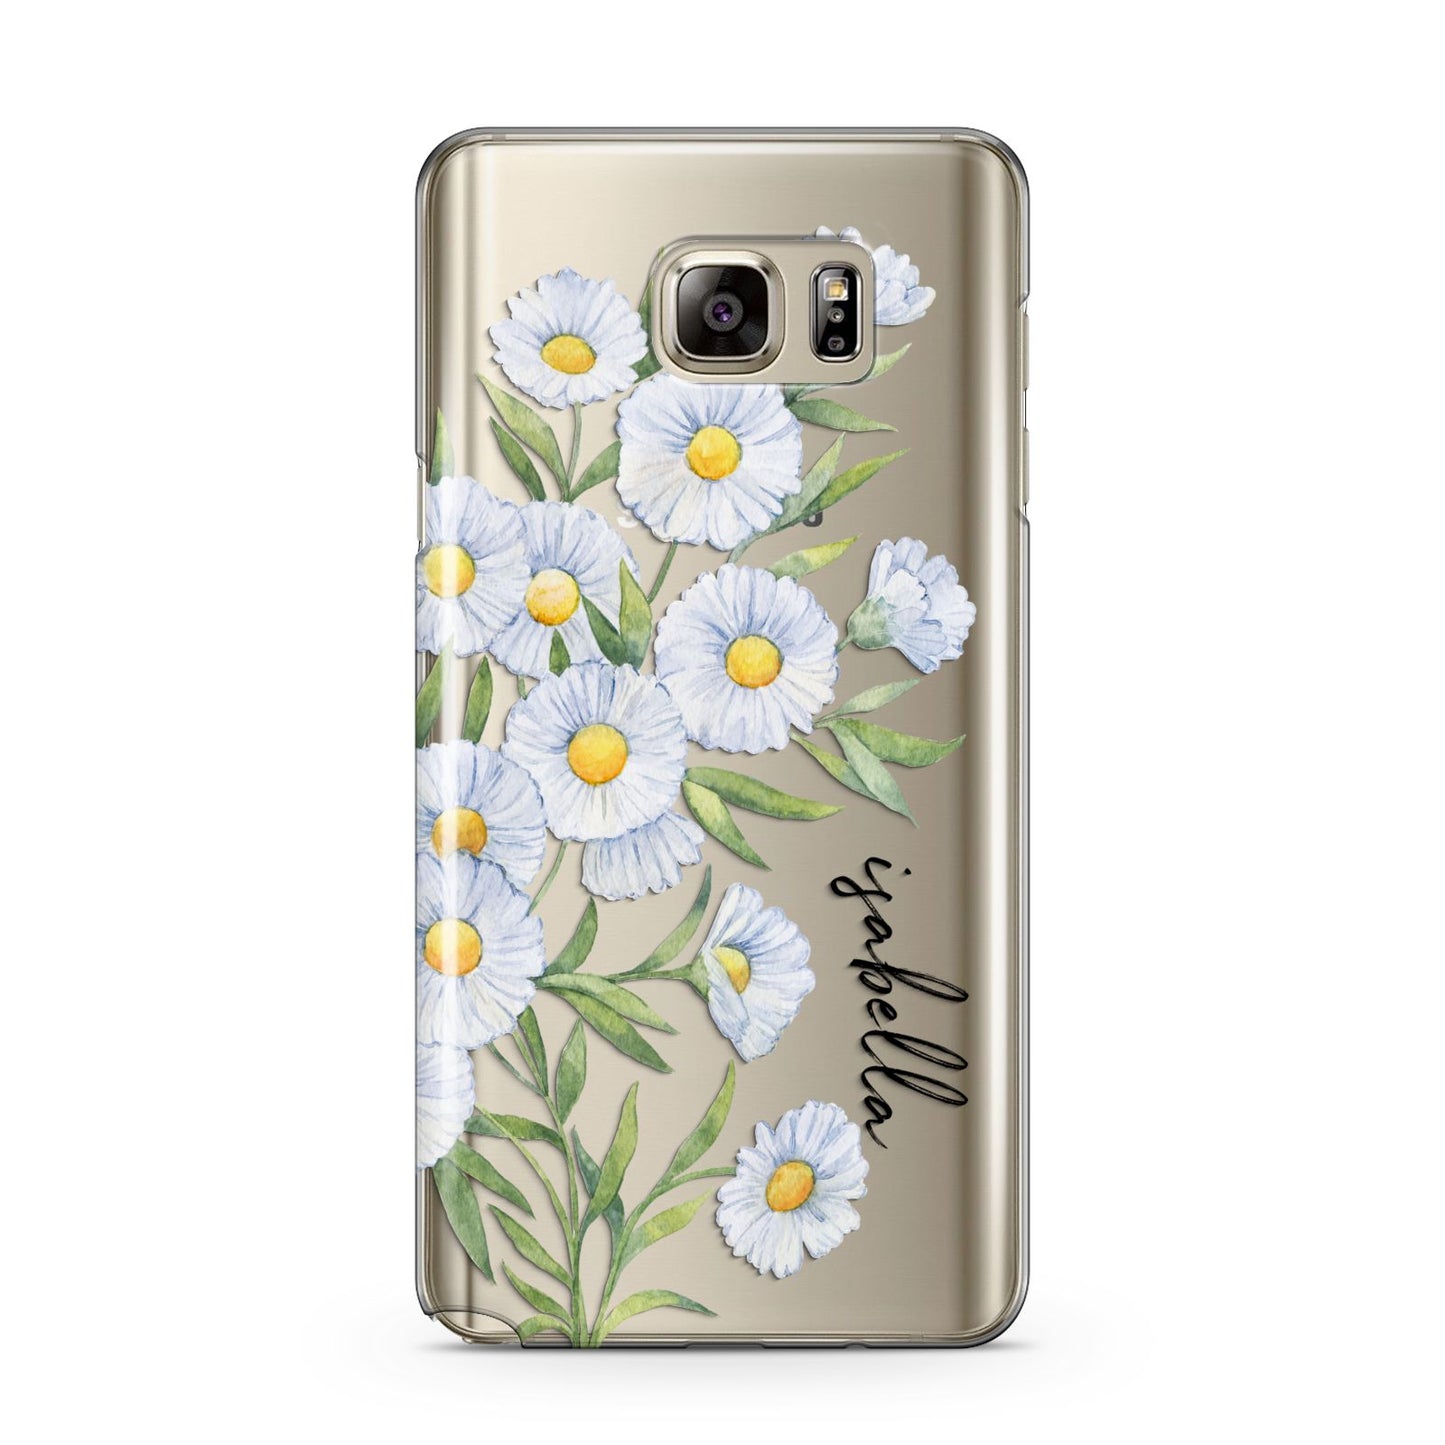 Personalised Daisy Flower Samsung Galaxy Note 5 Case